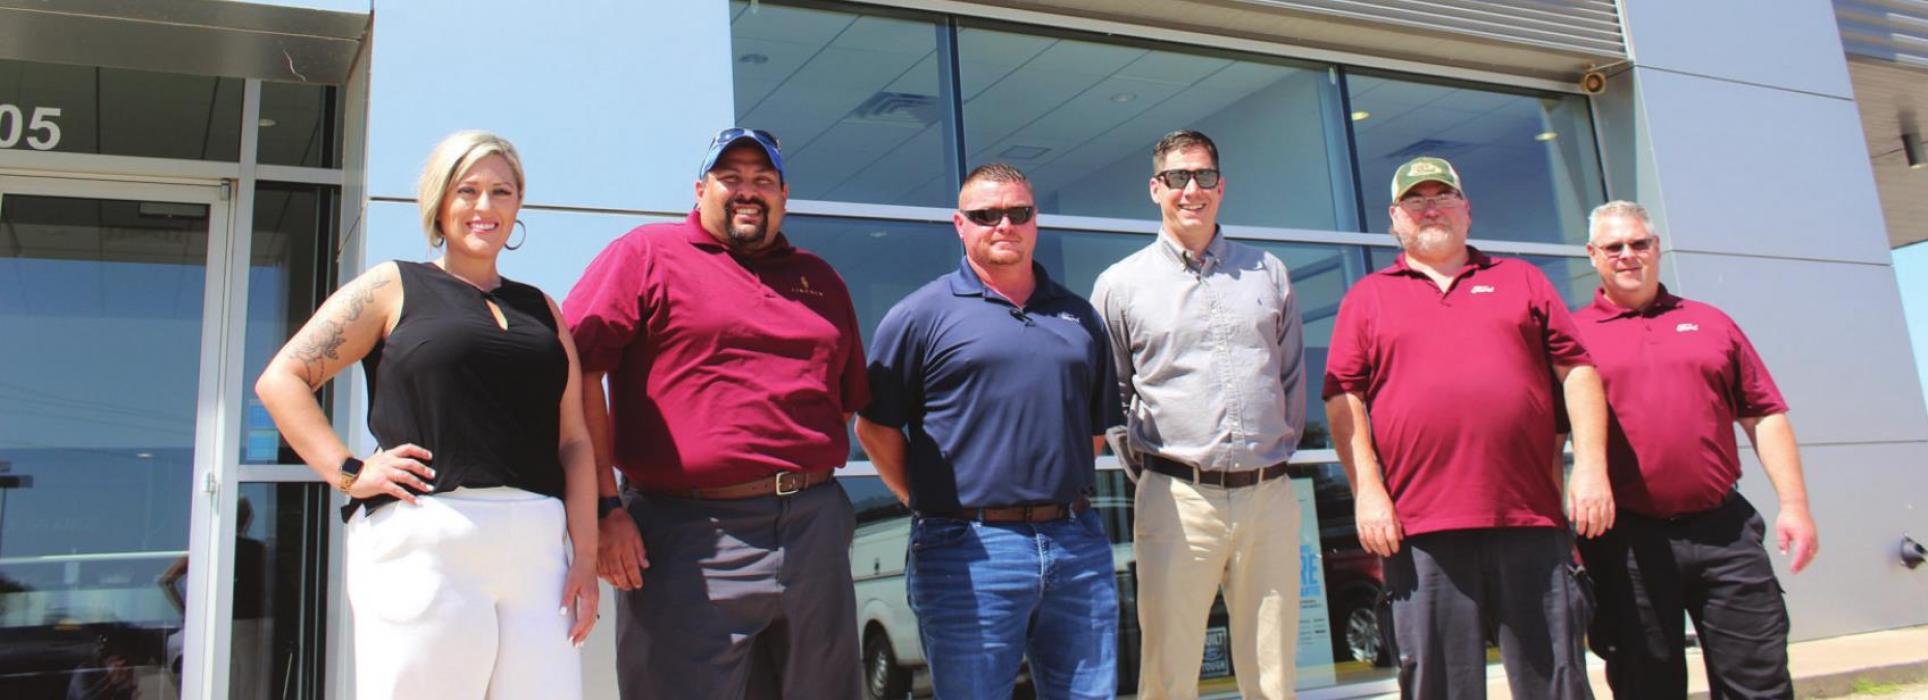 From left to right, the leadership team of Alpha One Ford in La Grange stand in front of the dealership’s new temporary sign – Natalie Hernandez (Internet and Marketing manager), Jose Molina (General Sales Manager), Ed Plumley (Sales manager), Shane Earls (Finance manager), Robby Nichols (Service Manager) and Mike Polasek (Body Shop Manager). Photo by Jeff Wick